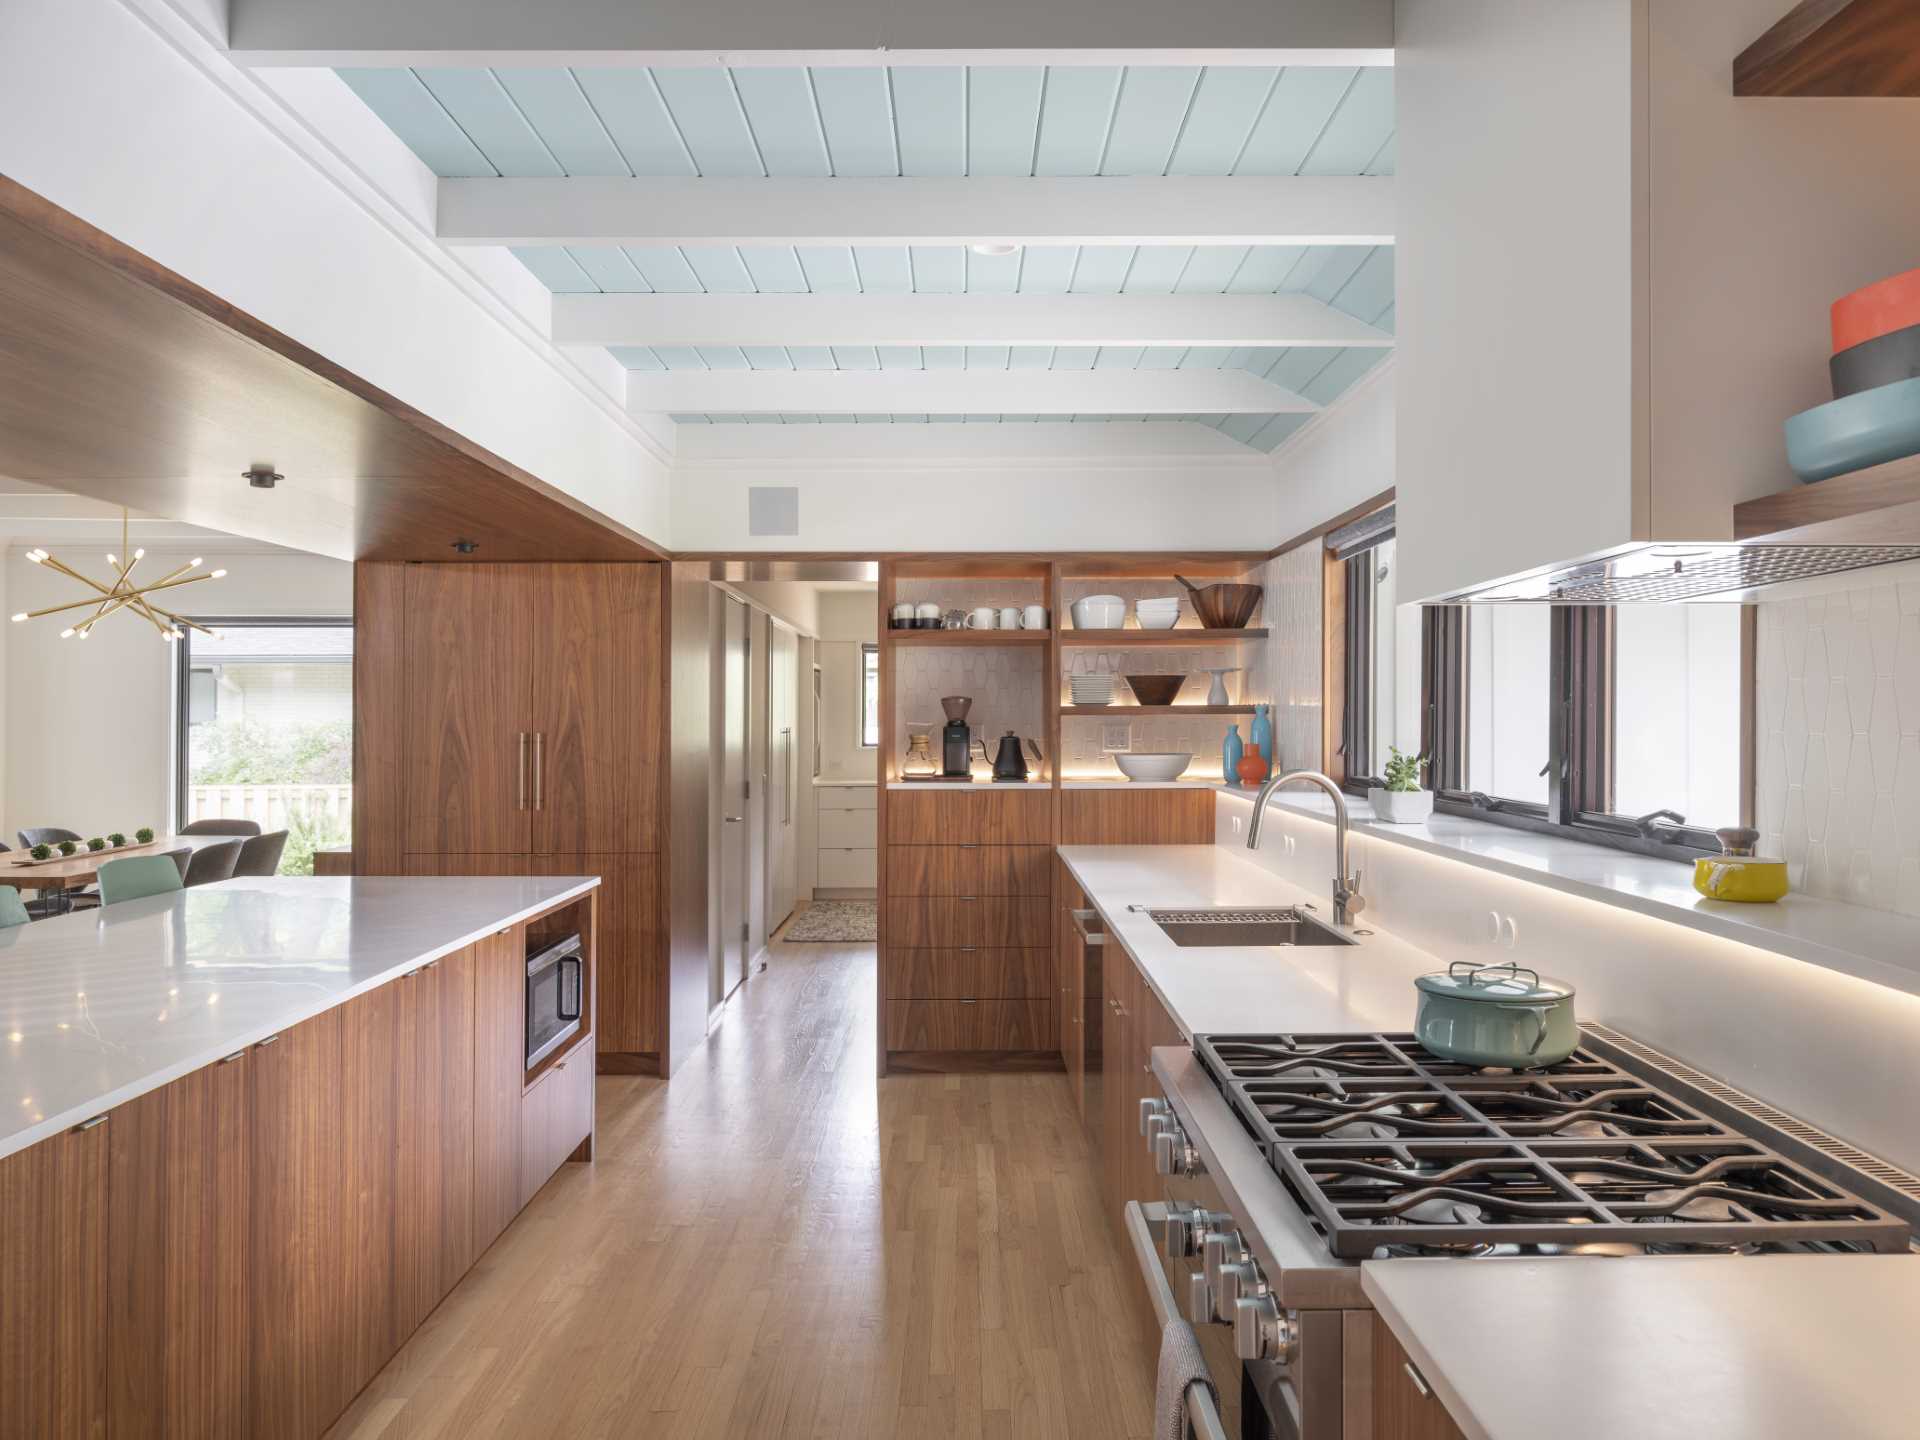 In this updated kitchen, wood cabinetry has been paired with white countertops with matching white tiles, and a light blue ceiling.